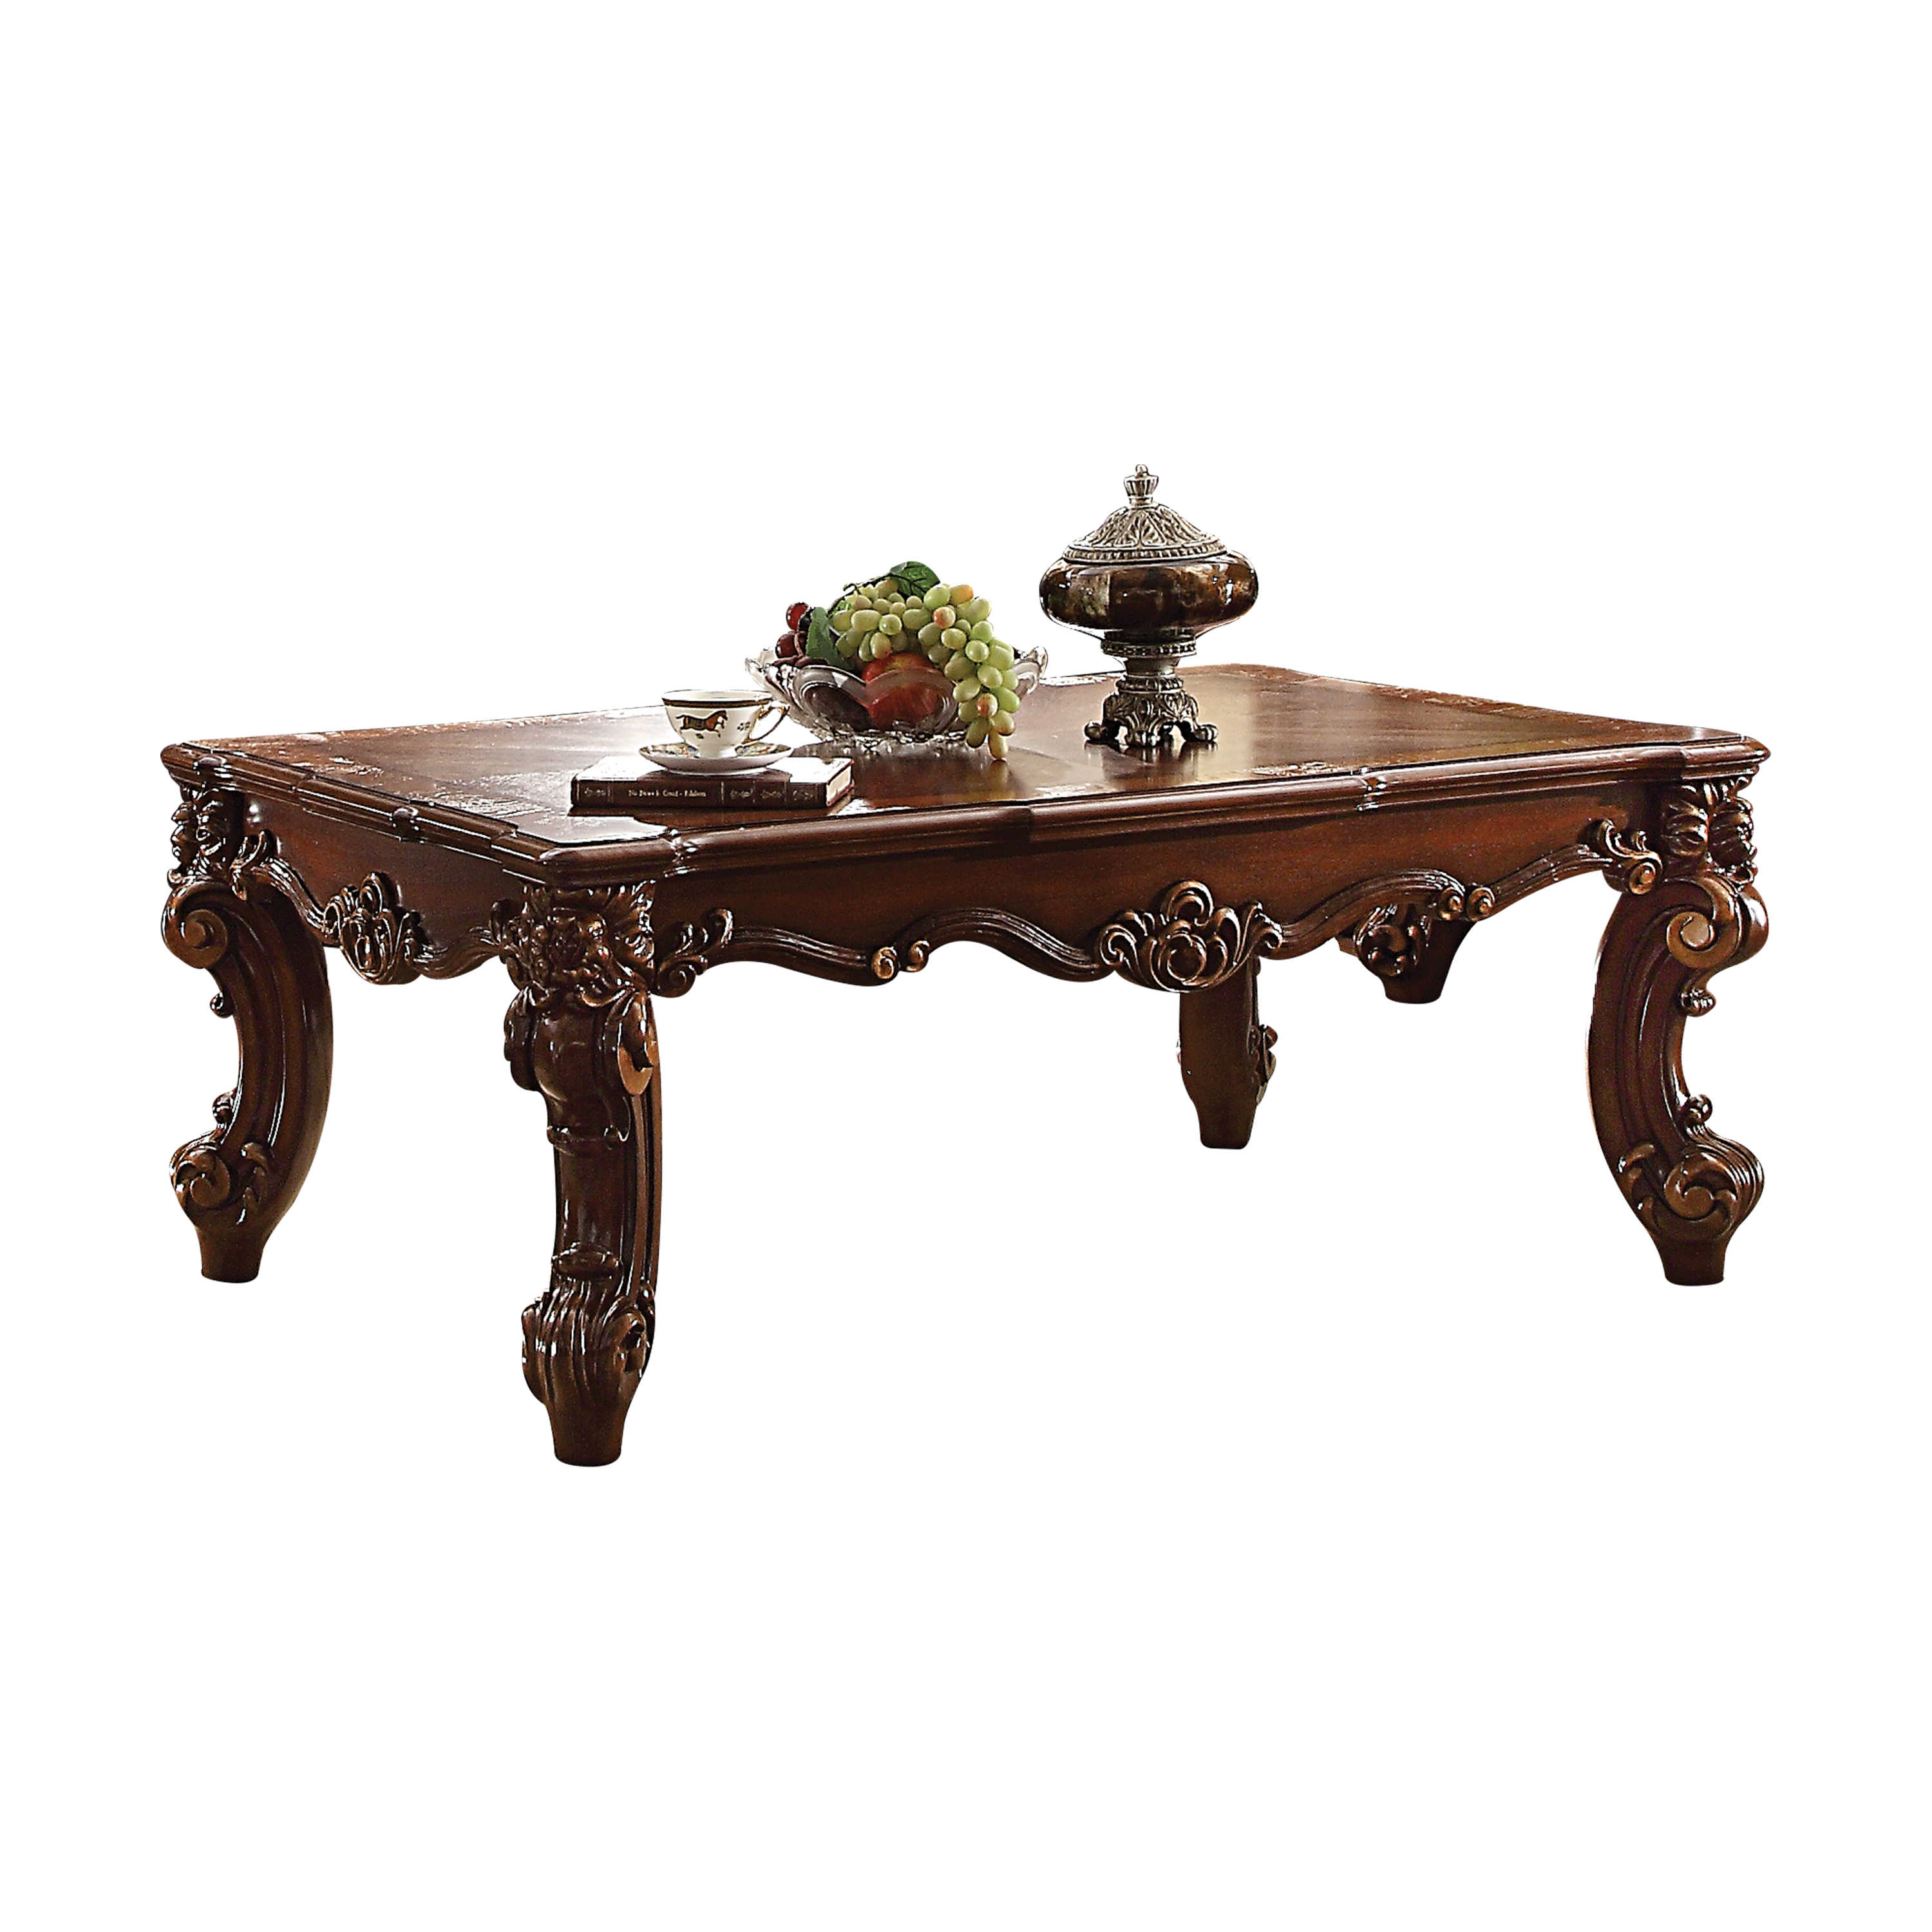 acme furniture vendome cherry coffee table the classy home acm new traditional end tables click enlarge what colour cushions with chocolate brown sofa big lots wall tures italian